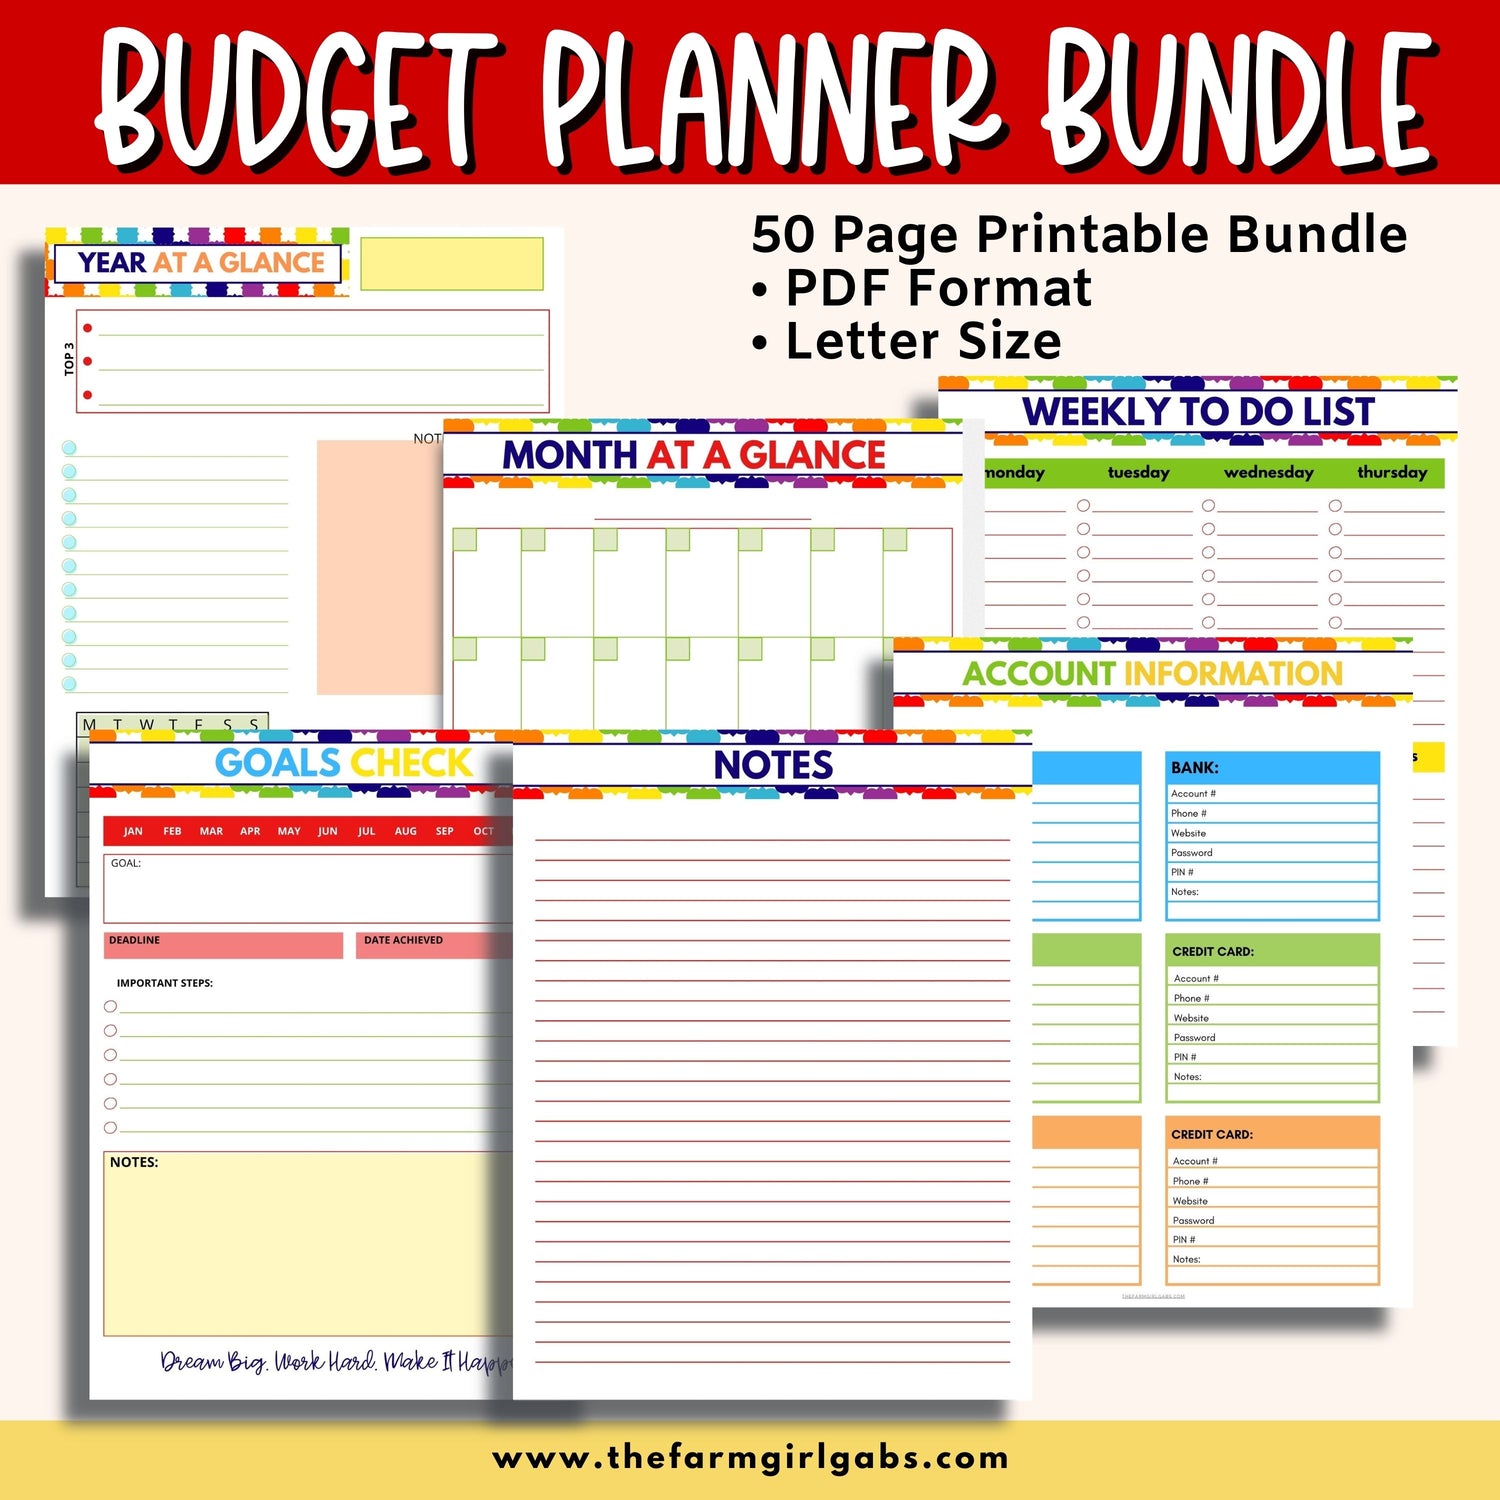 Pin on BUDGET PLANNER